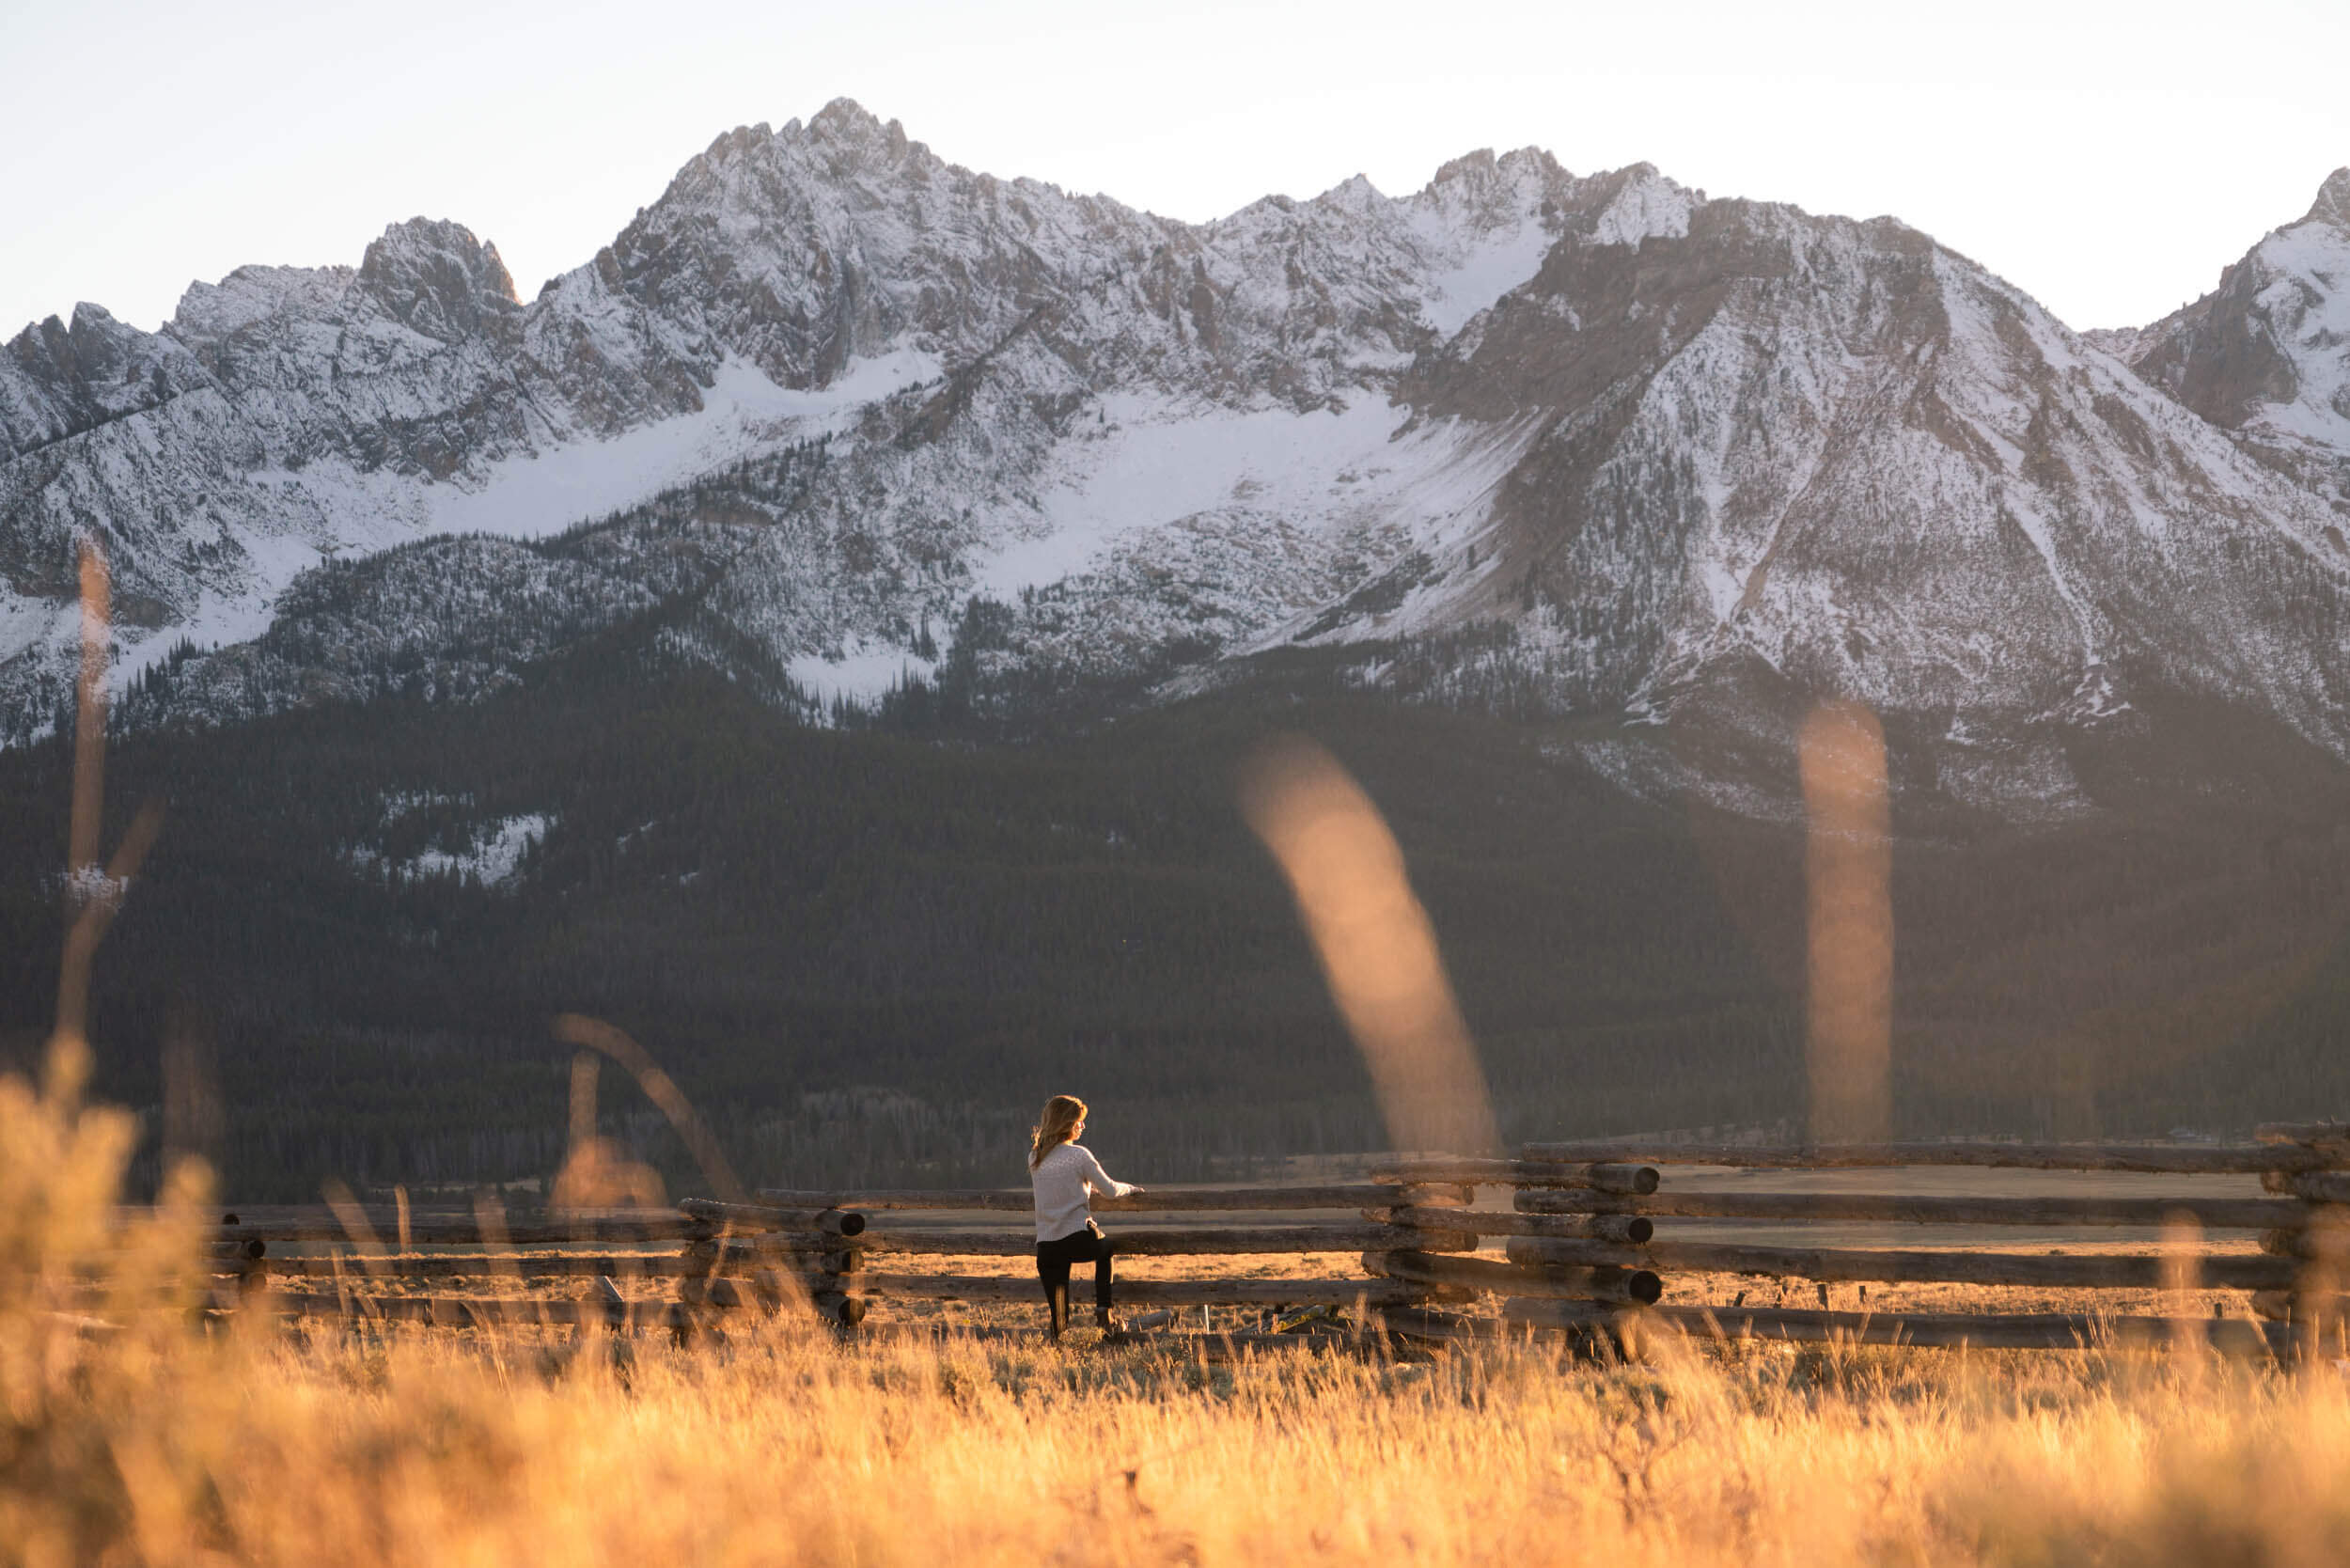 Taking in views of the Sawtooth Mountains from Stanley, Idaho.